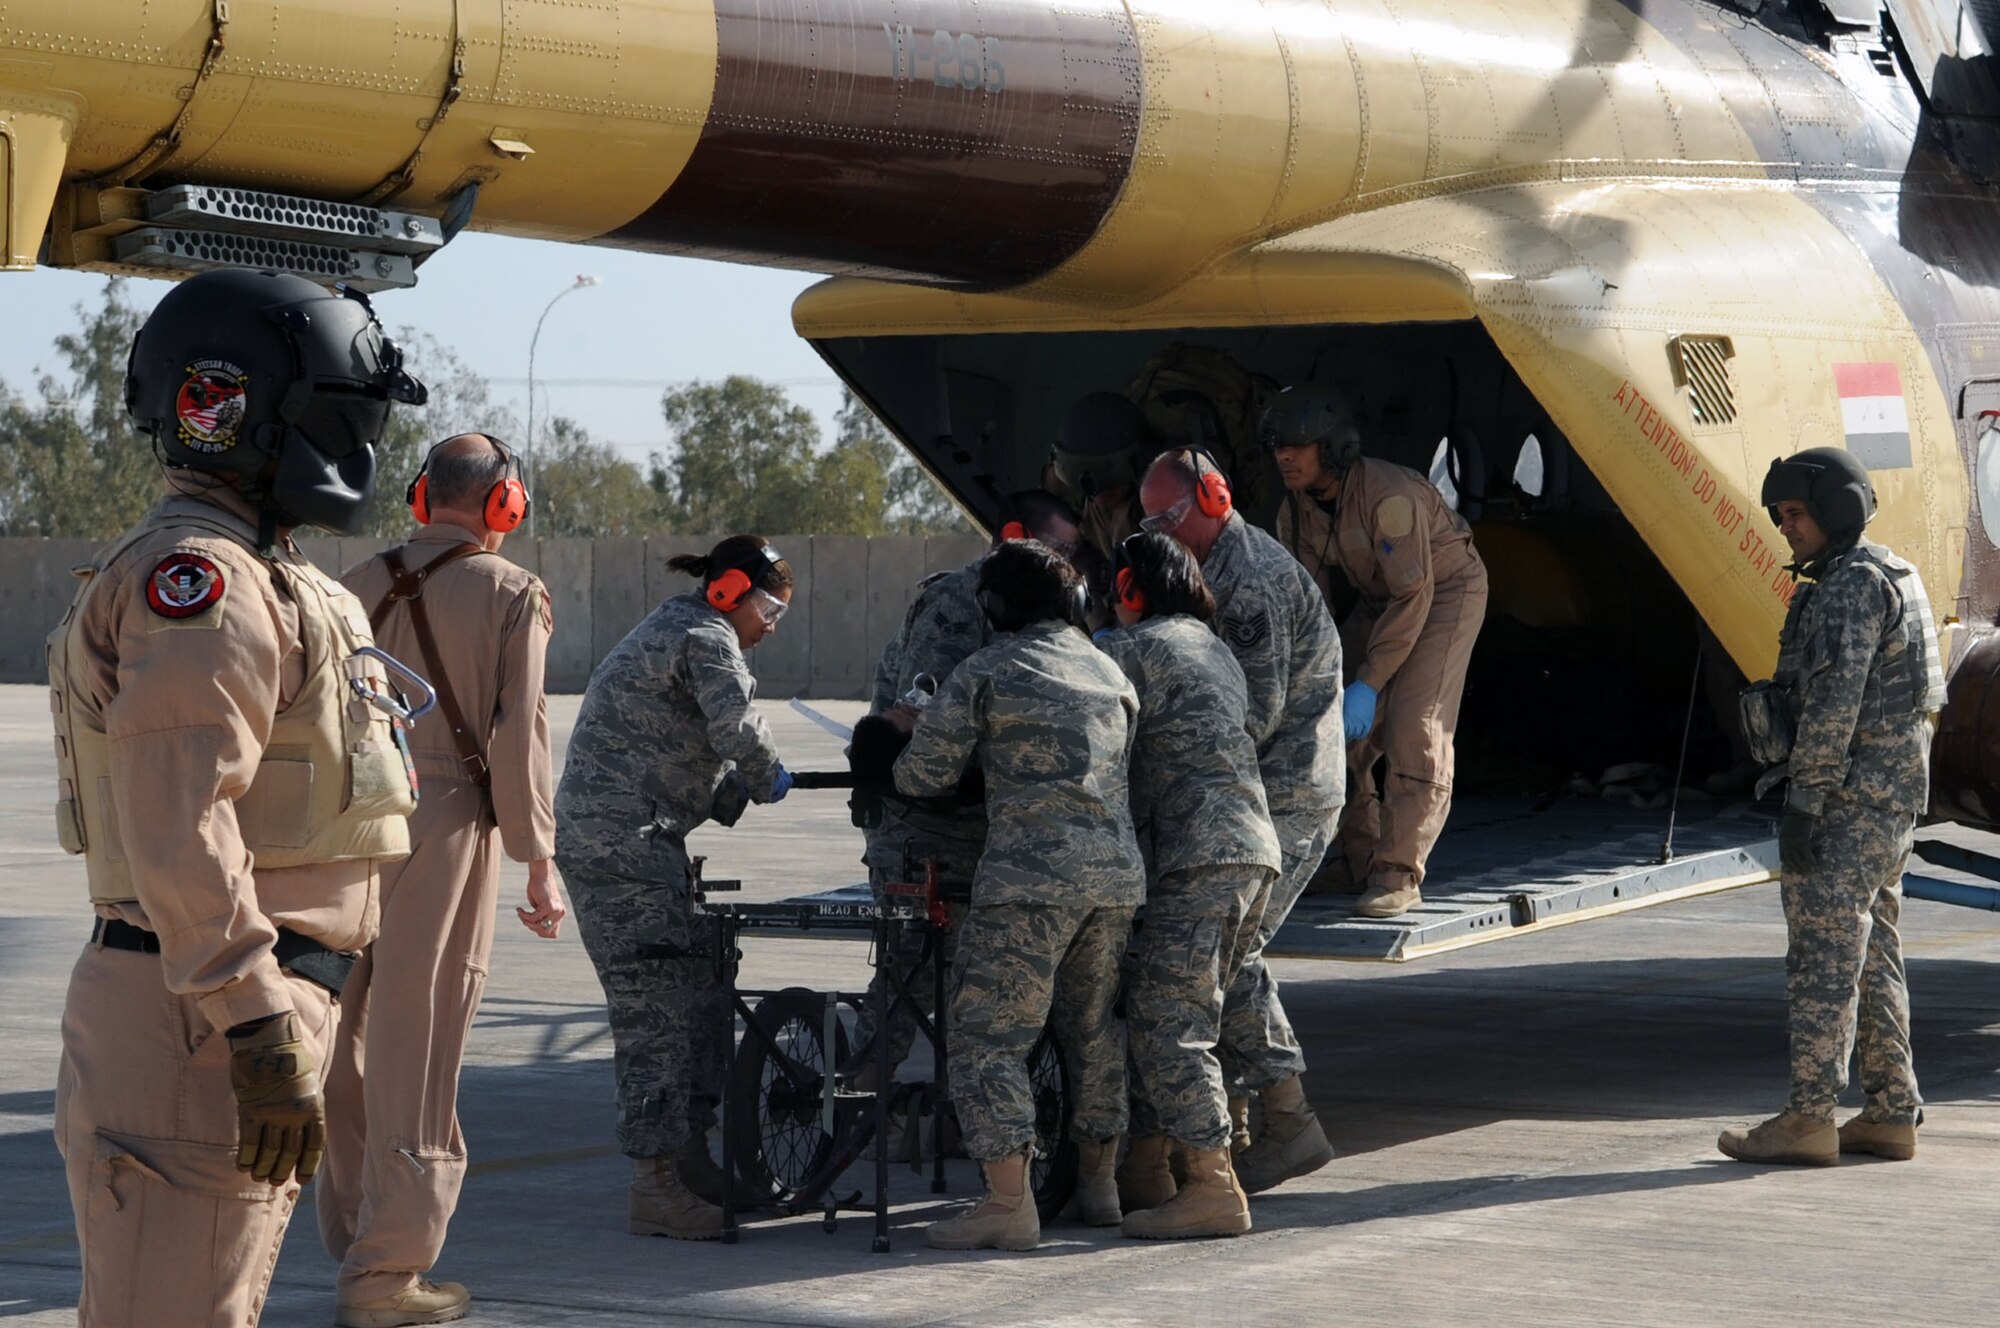 JOINT BASE BALAD, Iraq – Members of the 332nd Expeditionary Medical Group unload a patient from an Iraqi helicopter during medical evacuation training for the Iraqi Air Force Dec. 21, 2009. (U.S. Air Force photo/Senior Airman Brittany Y. Bateman)